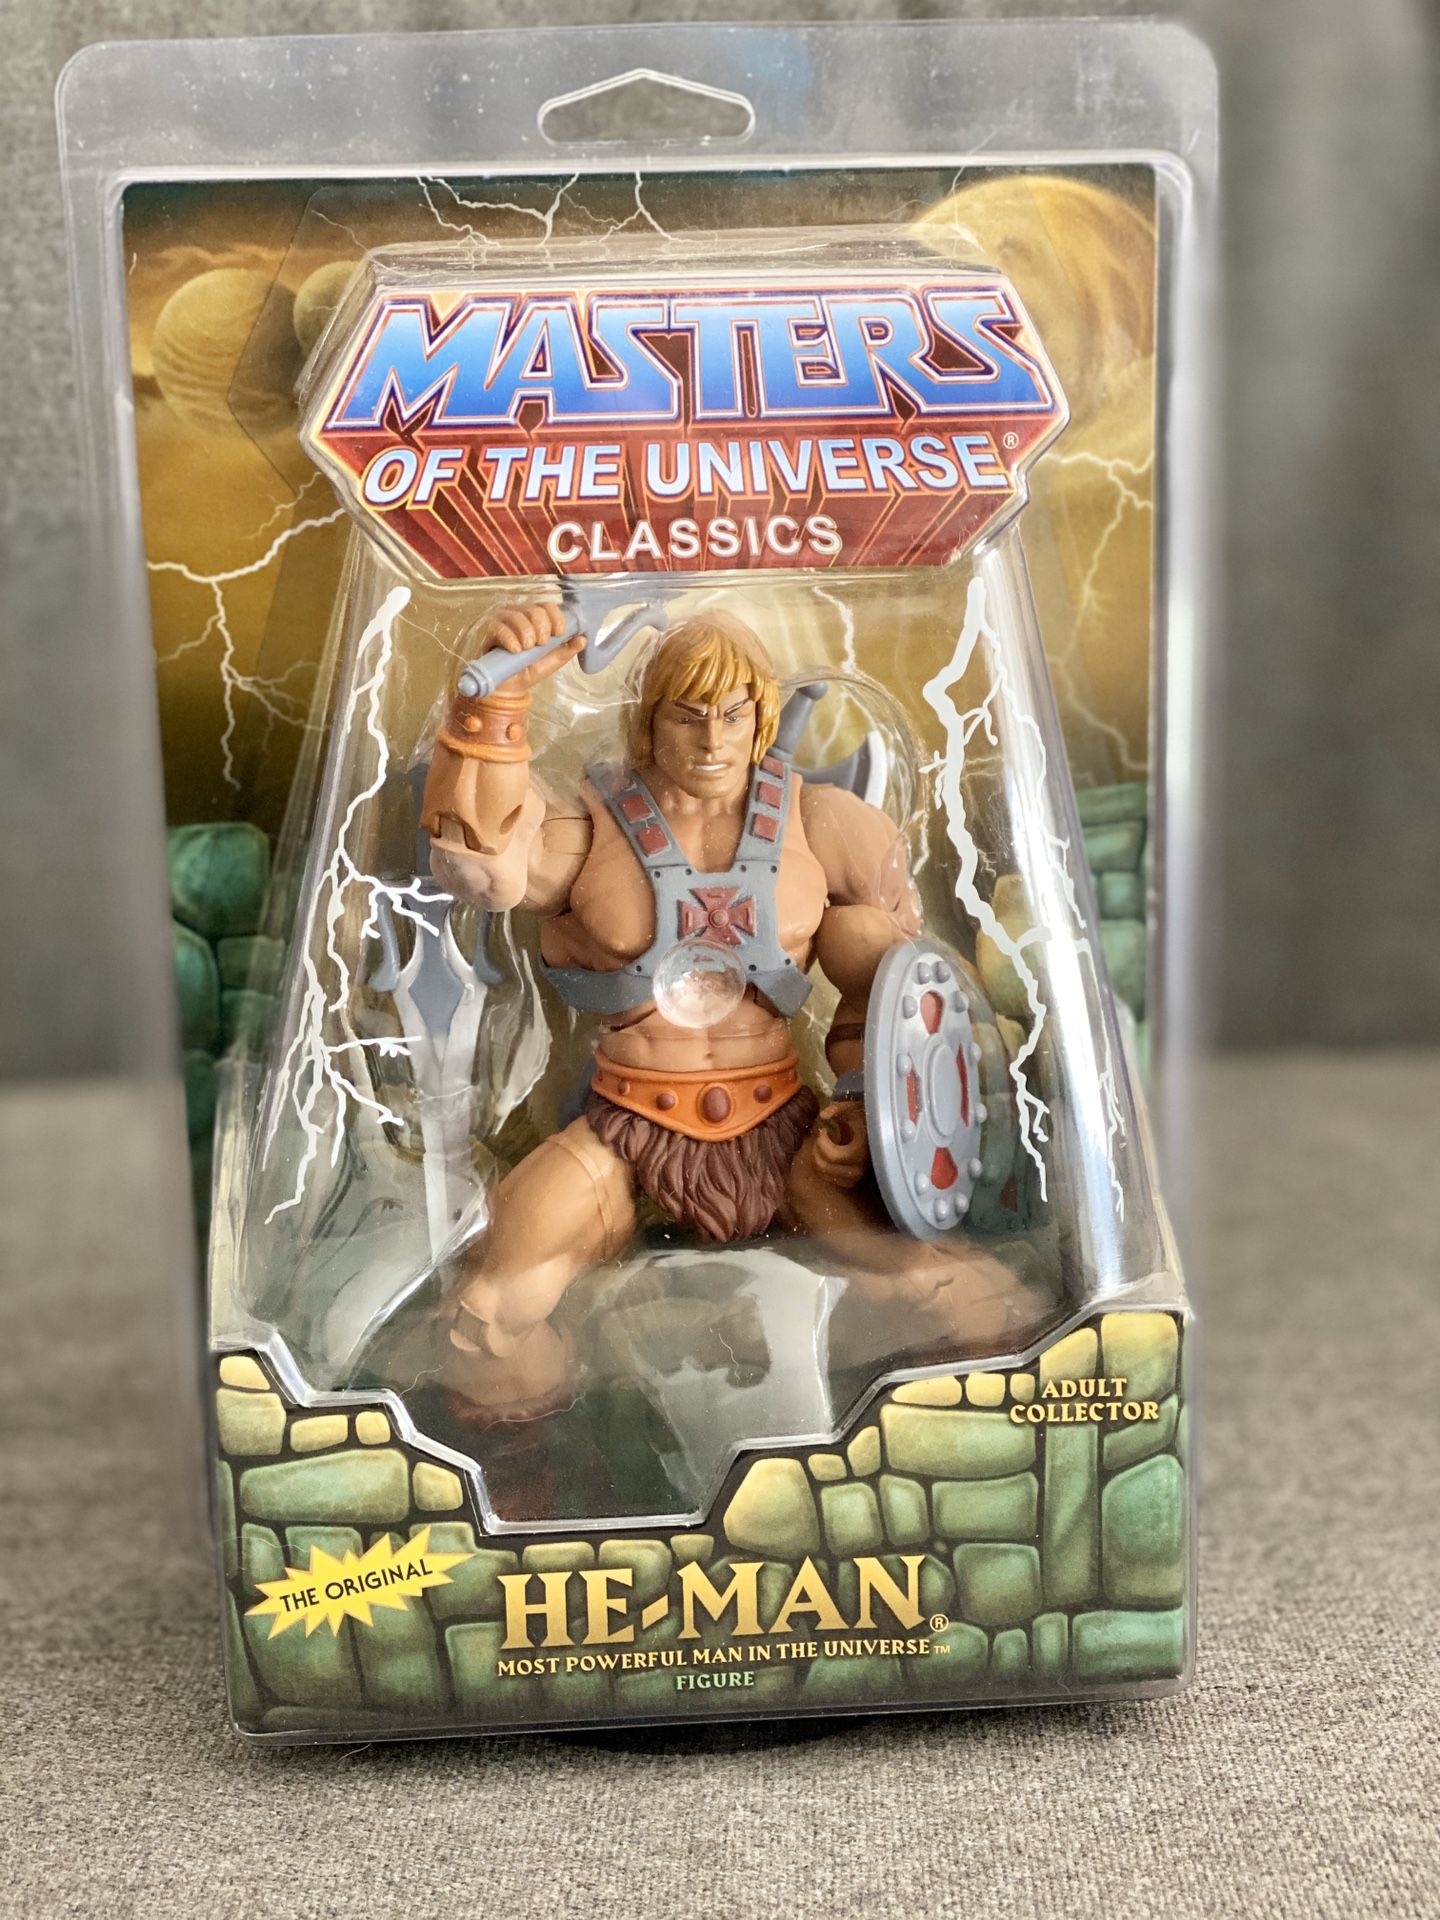 He-Man Masters of the Universe Classics Very Rare Collector’s Item ©️ 2012 Mattel